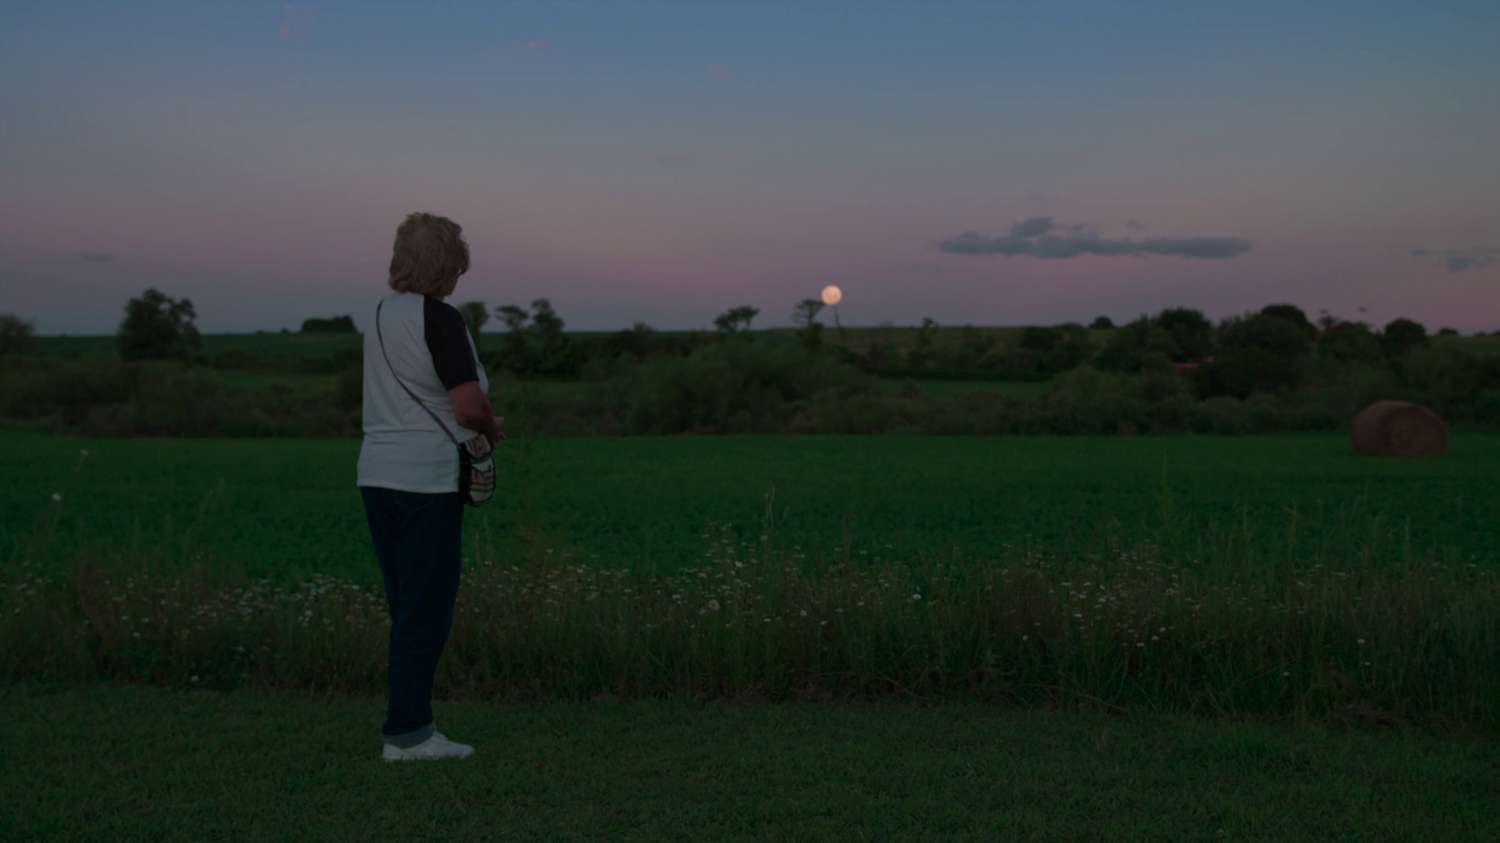 One of the friends stands alone at dusk, looking out over a field with the moon coming up in the distance.